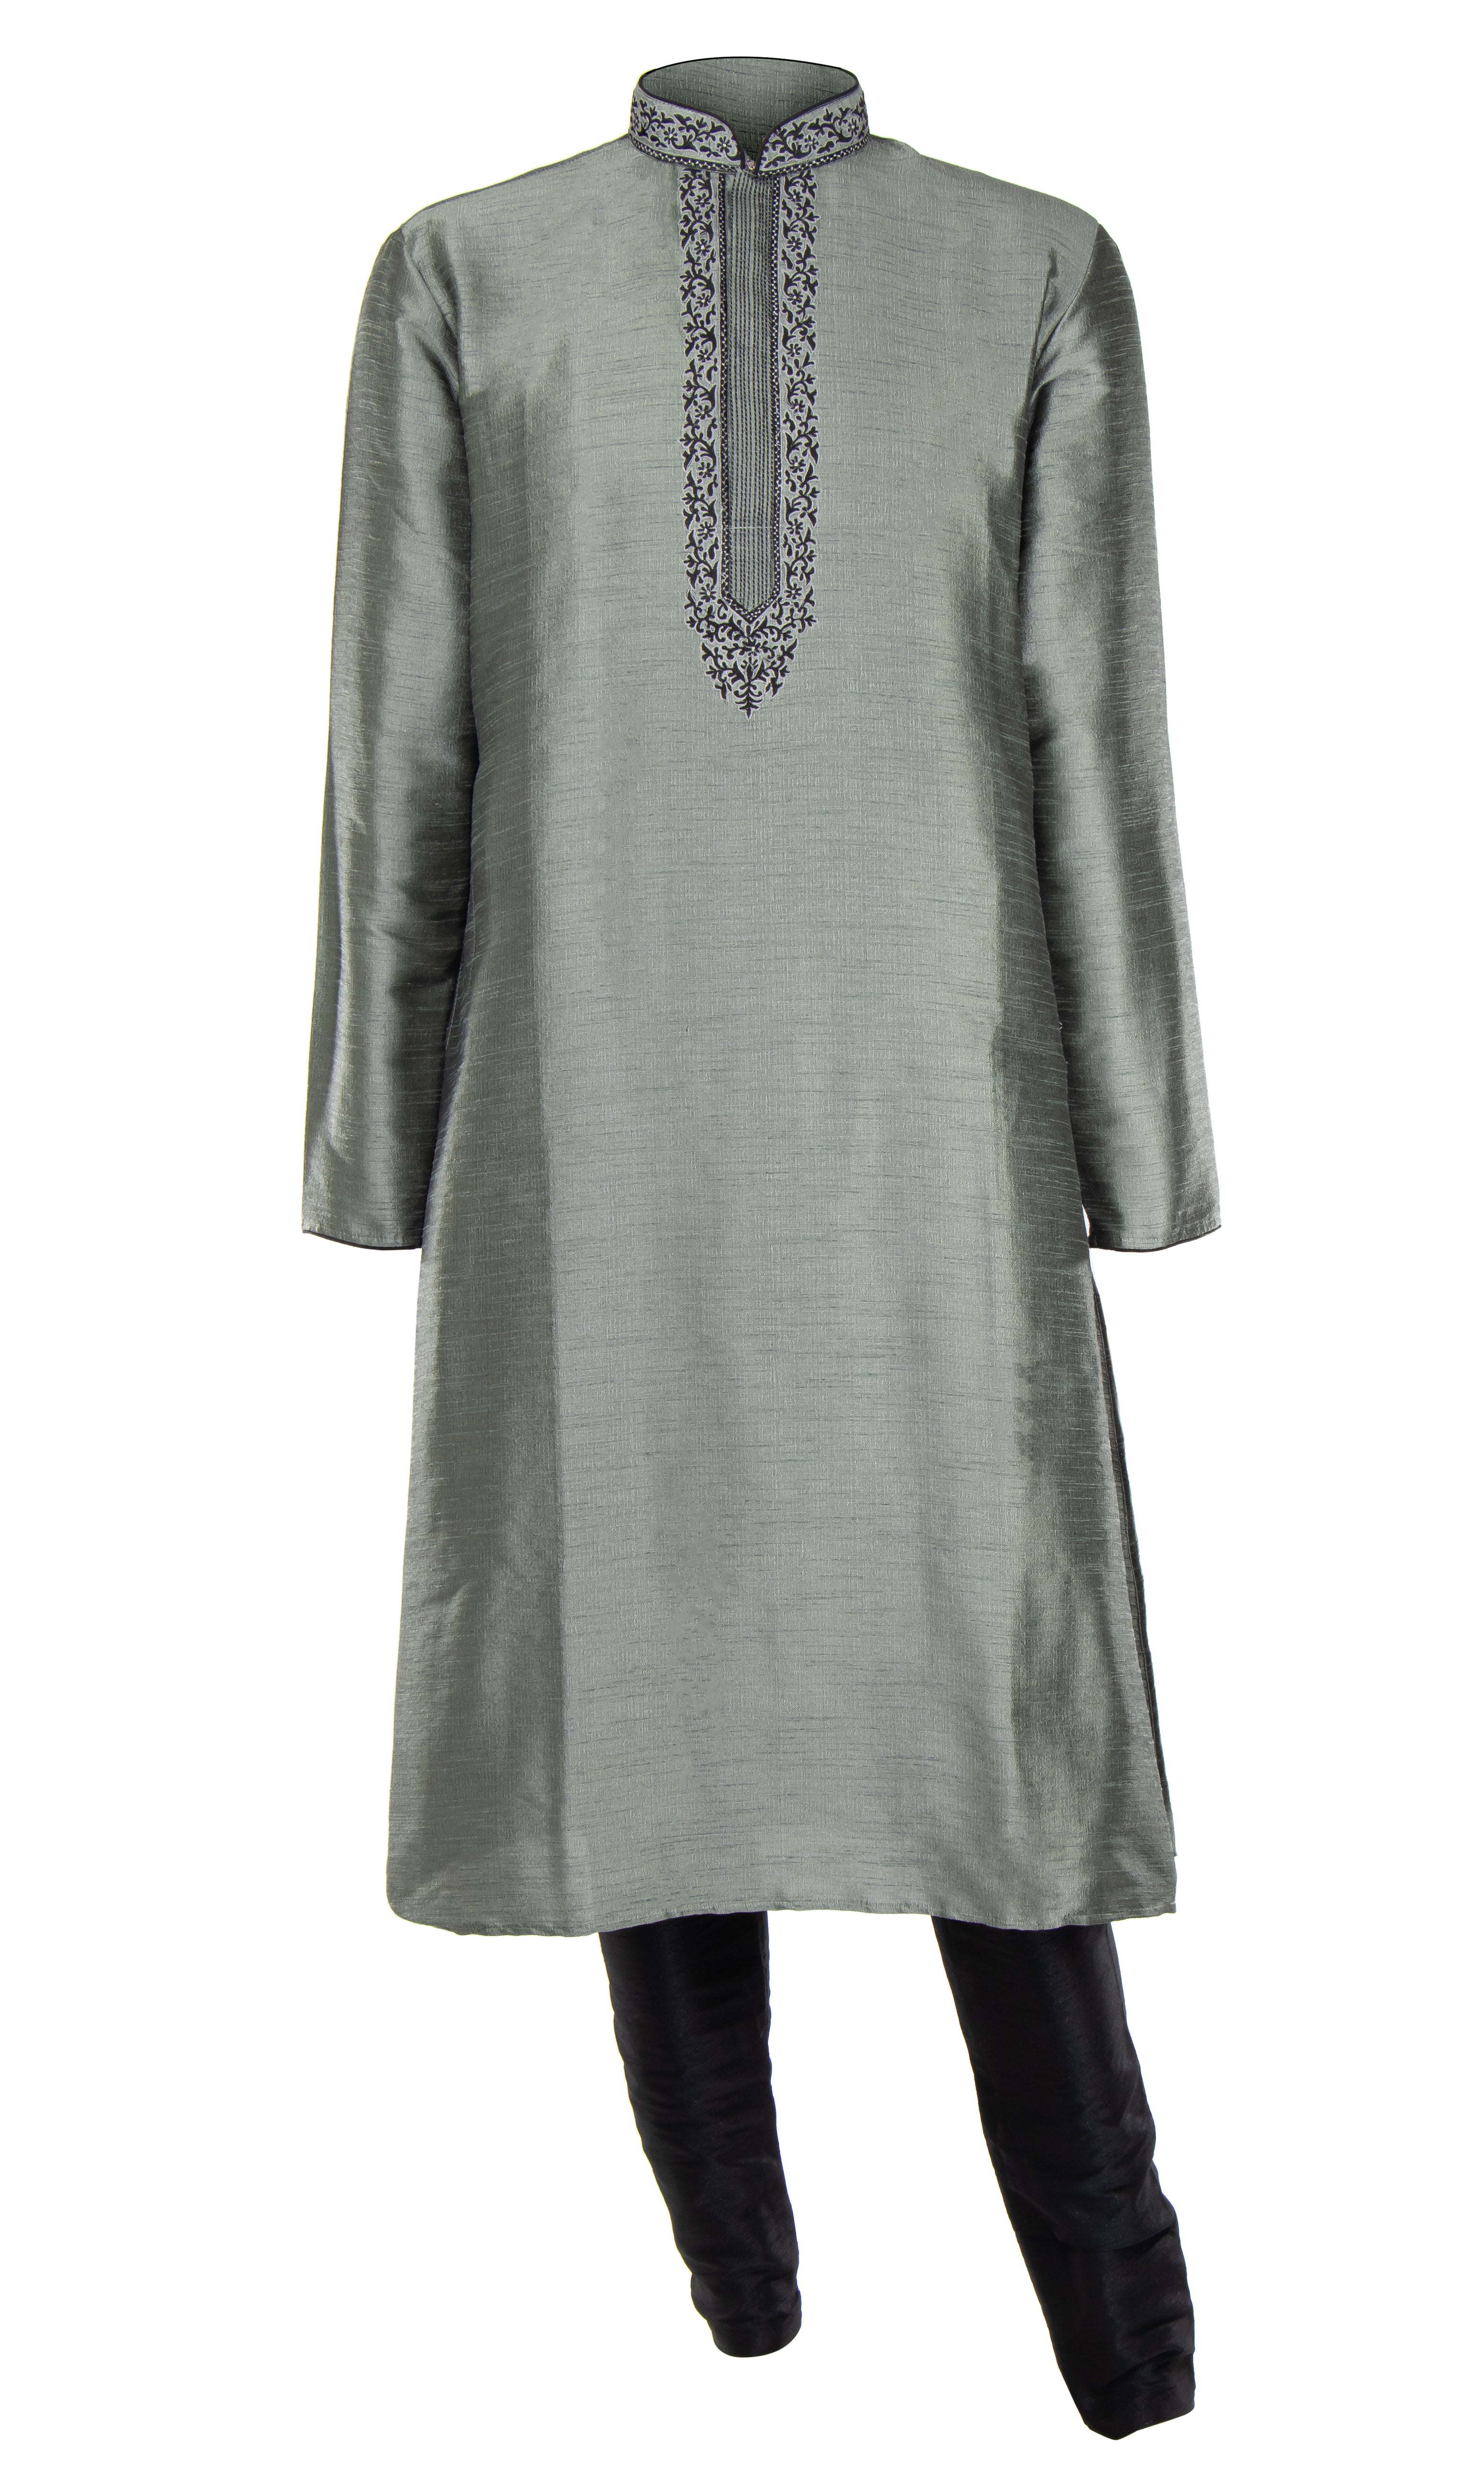 Gray silk Kurta garnished with chic black floral embroidery through the center and paired with a silk black pant.